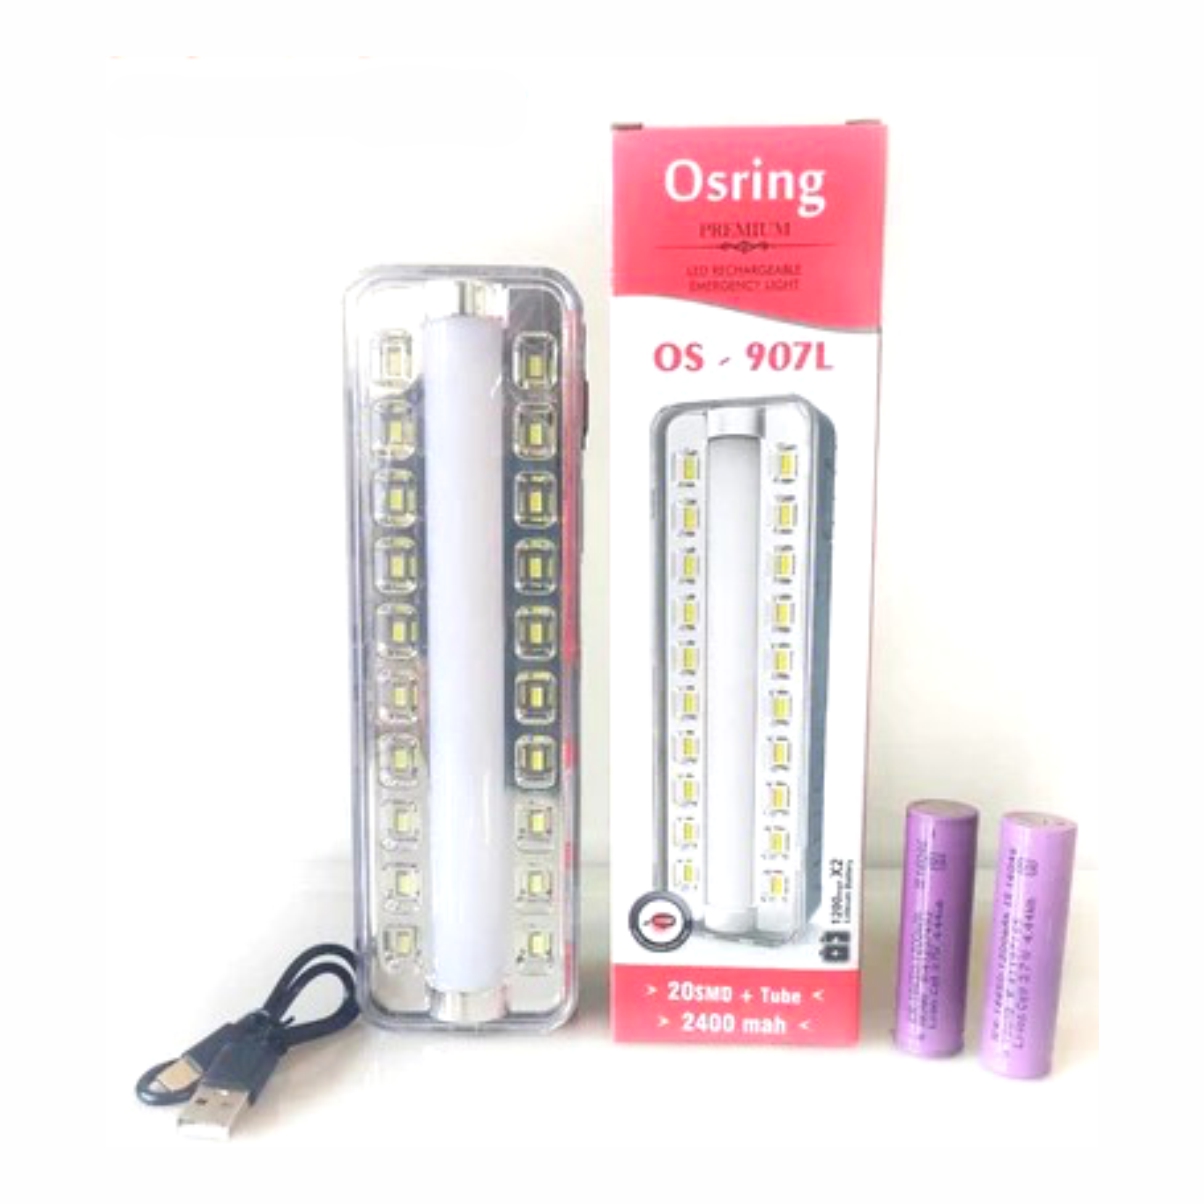 Osring OS-907L Emergency Light, Superior quality Rechargeable battery